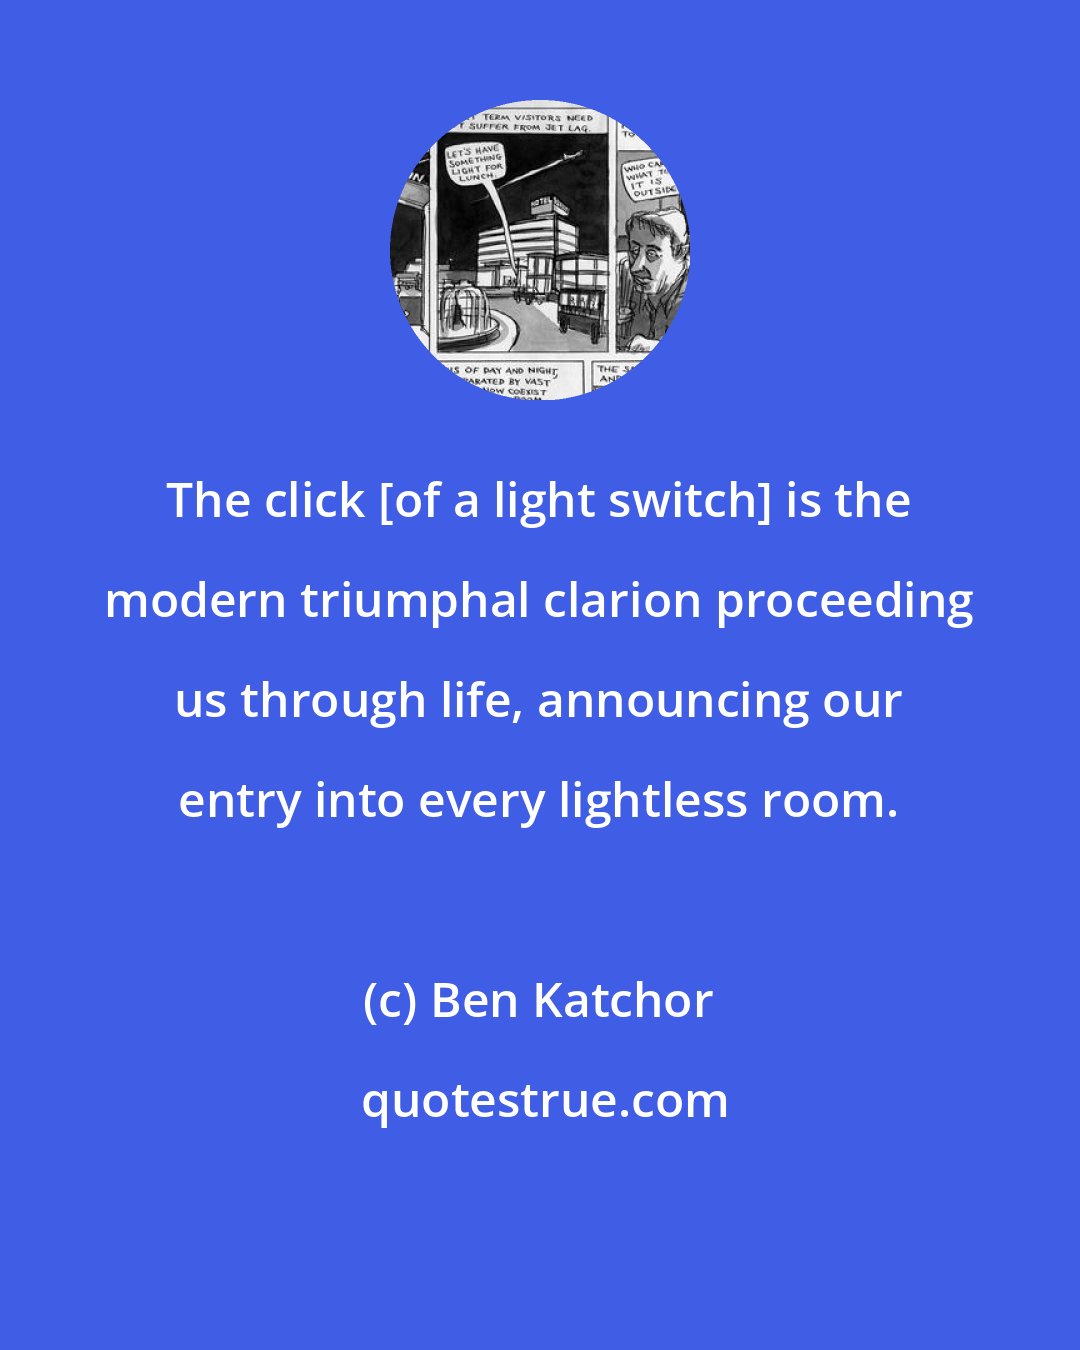 Ben Katchor: The click [of a light switch] is the modern triumphal clarion proceeding us through life, announcing our entry into every lightless room.